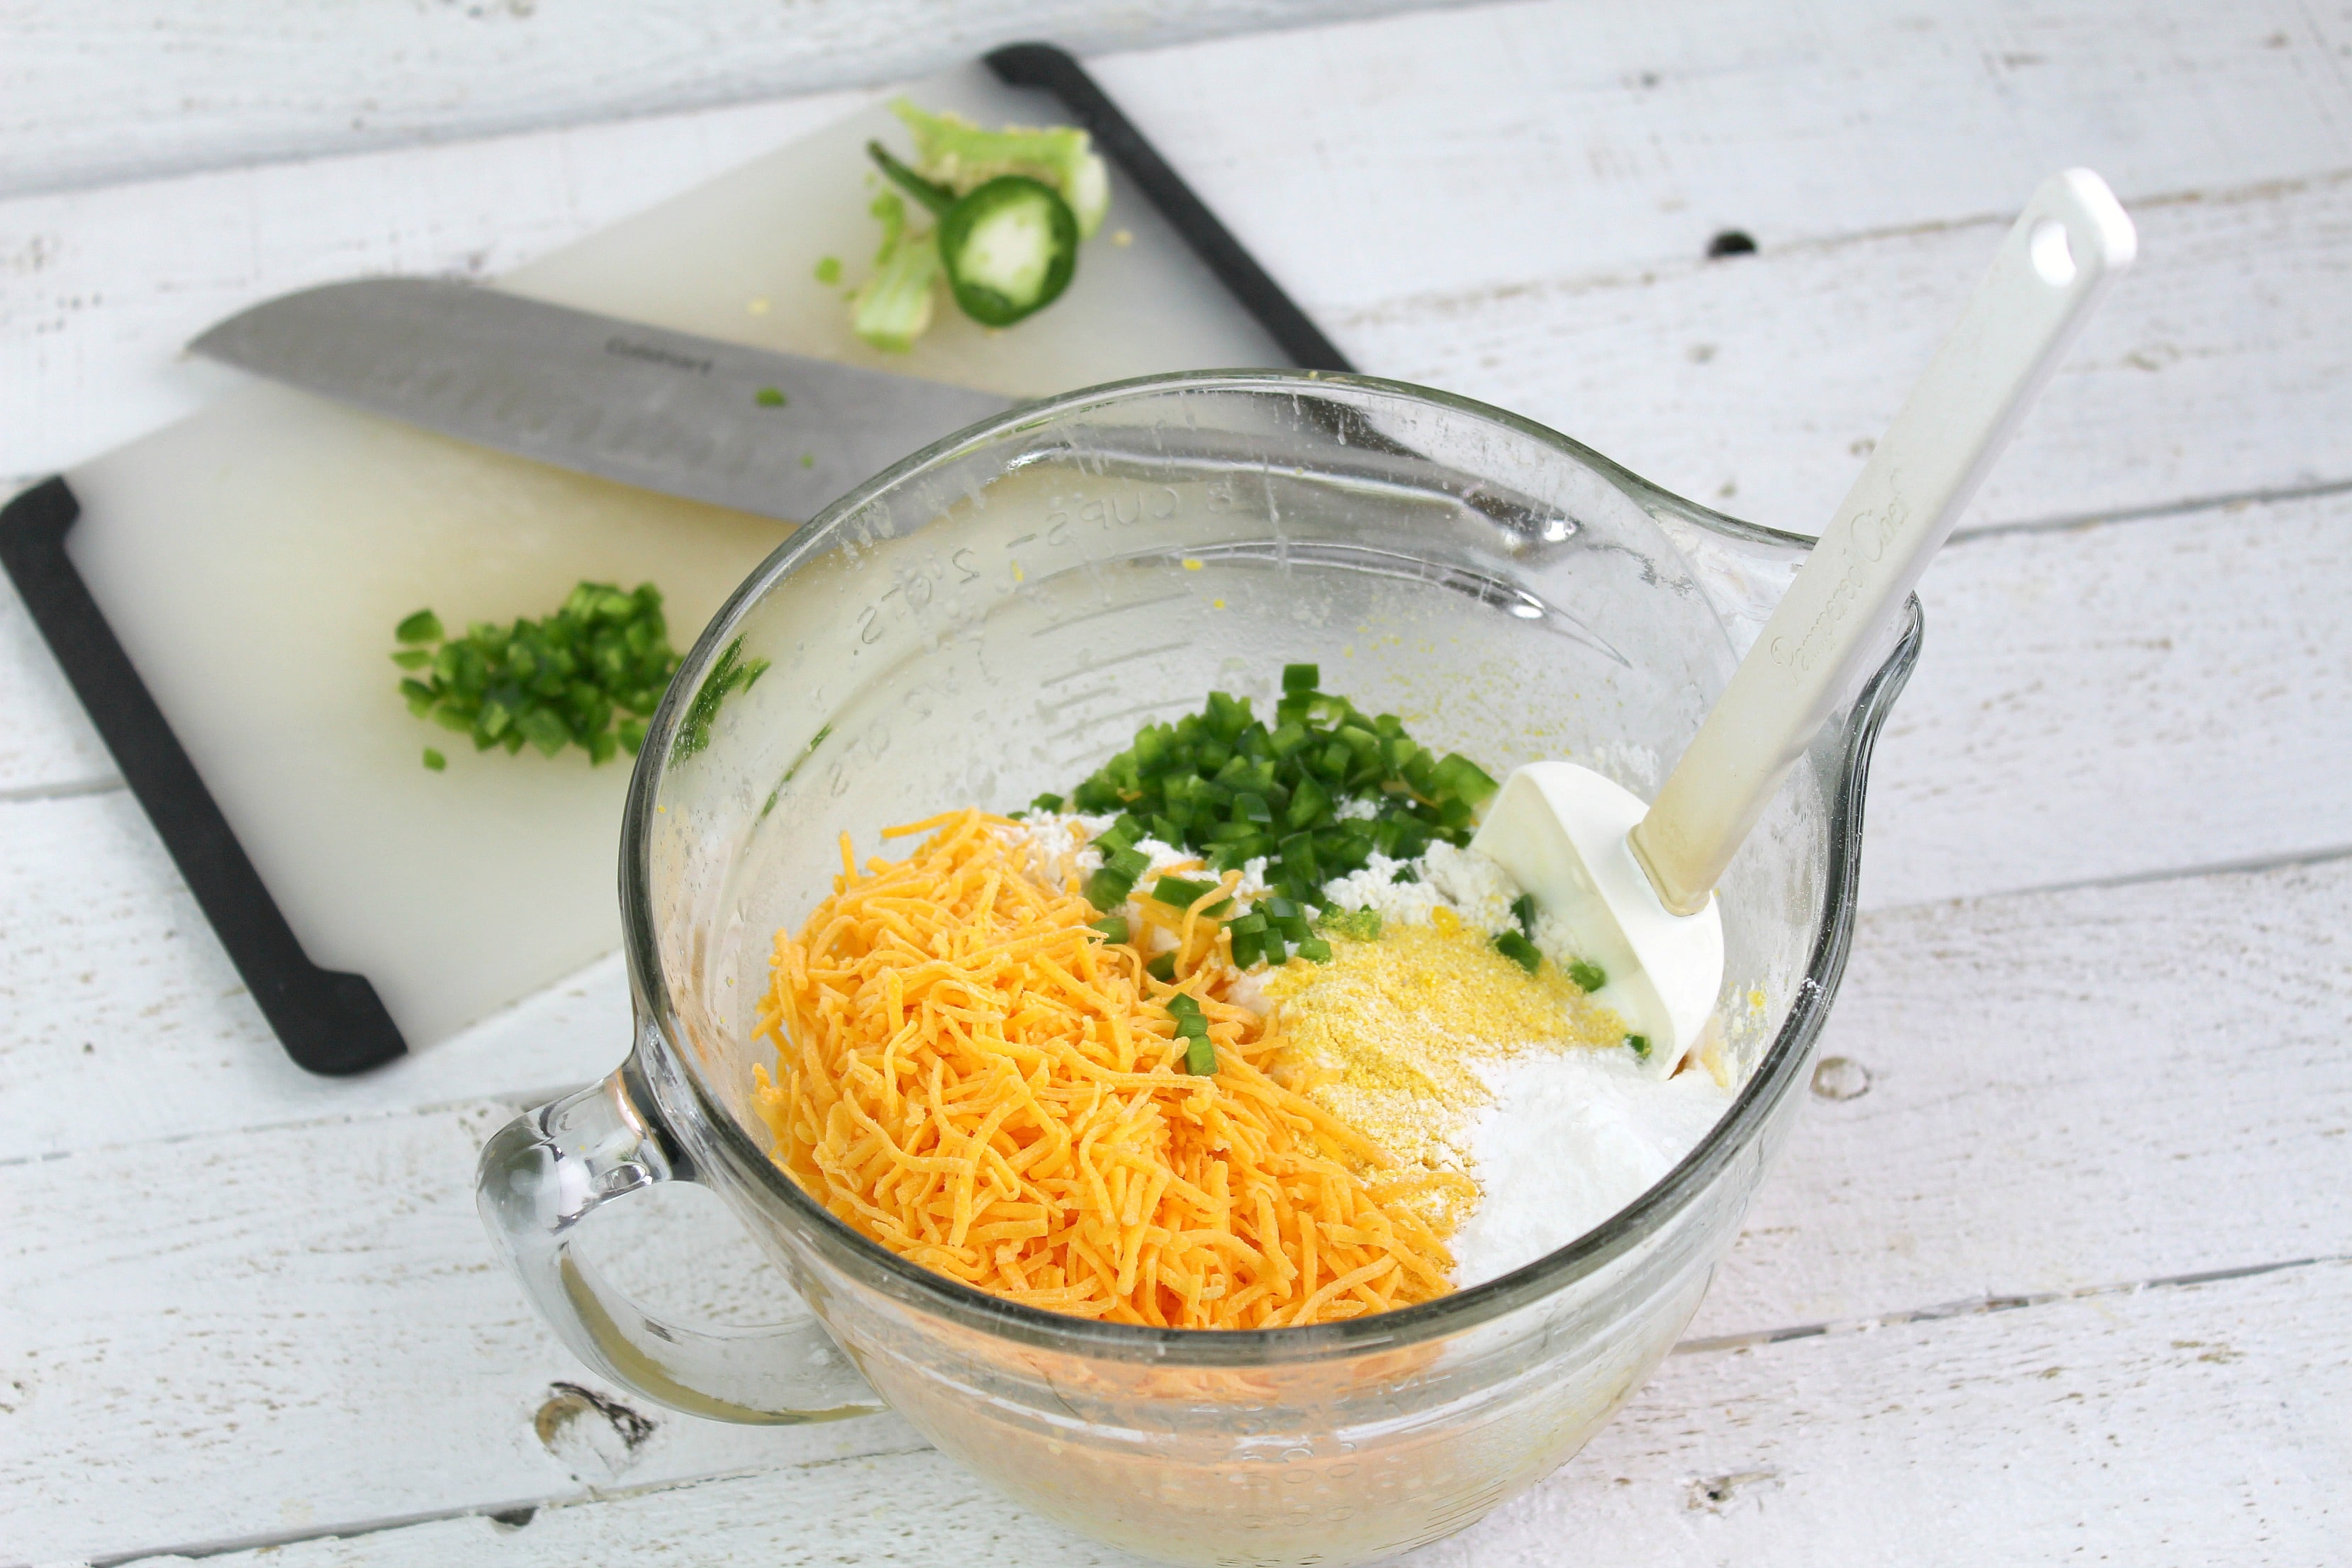 Add shredded cheese and chopped jalapeno to egg mixture